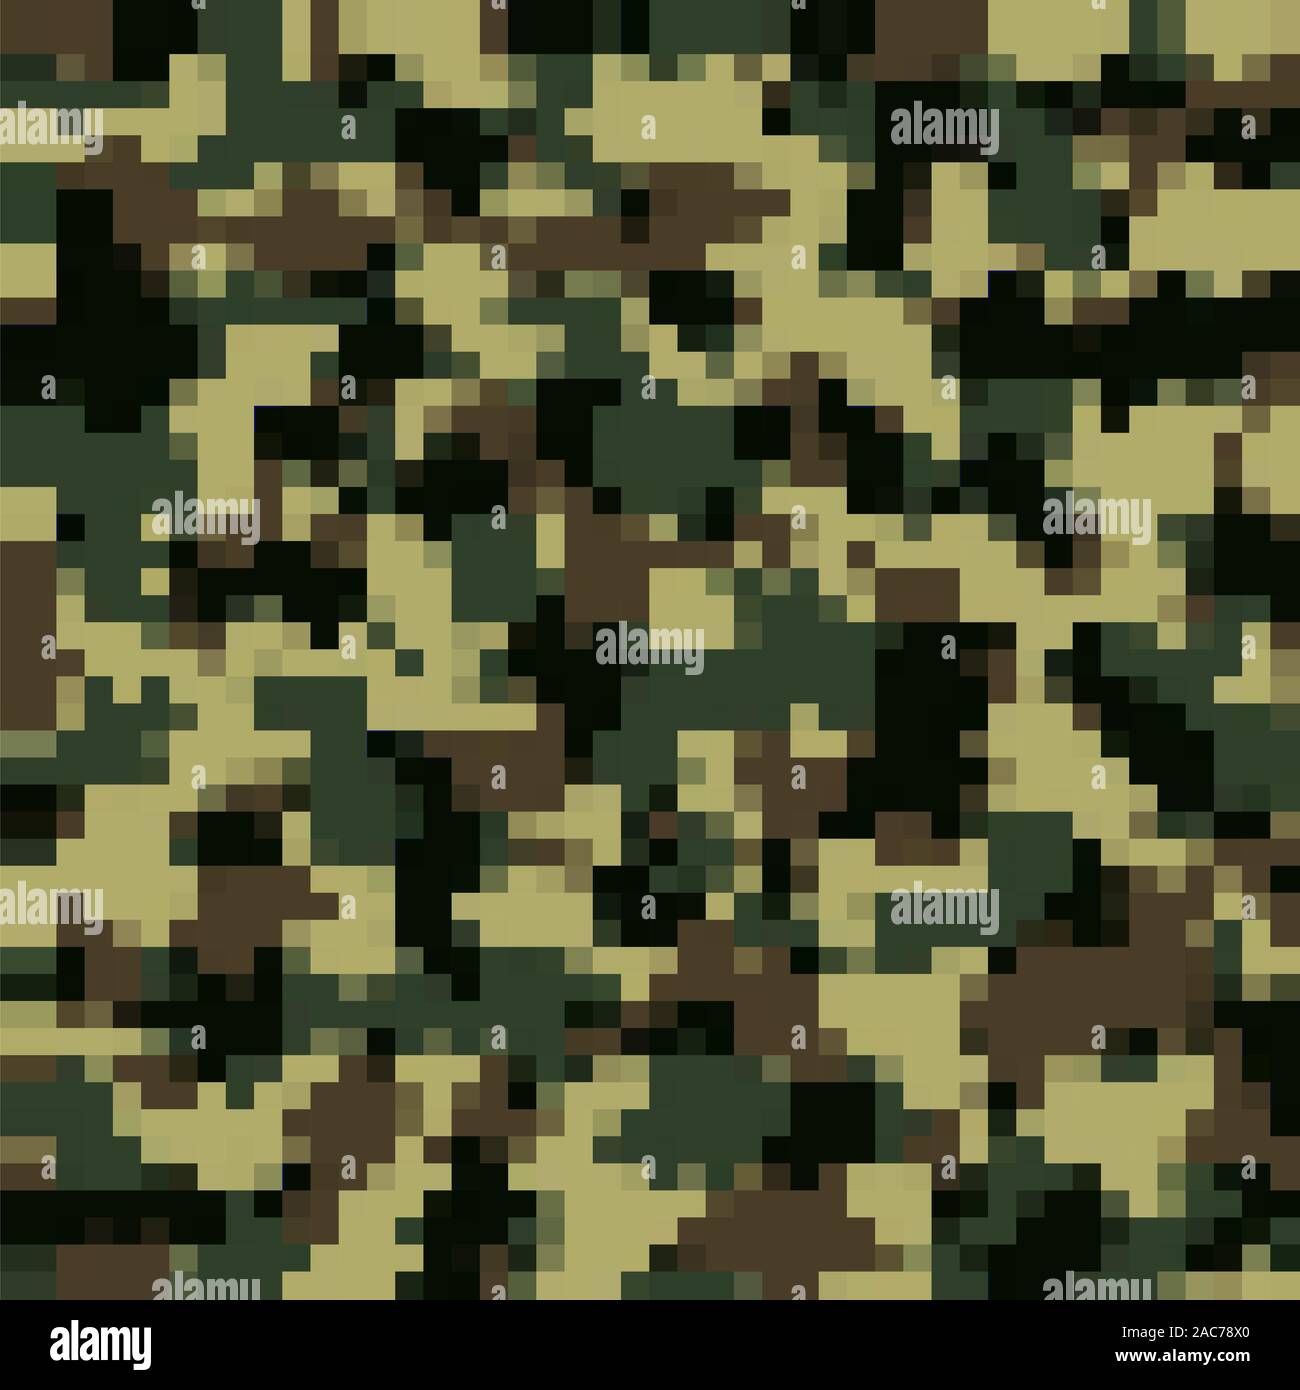 Urban Camouflage Background. Army Military Pattern. Green Pixel Fabric  Textile Print for Uniforms and Weapons Stock Photo - Alamy